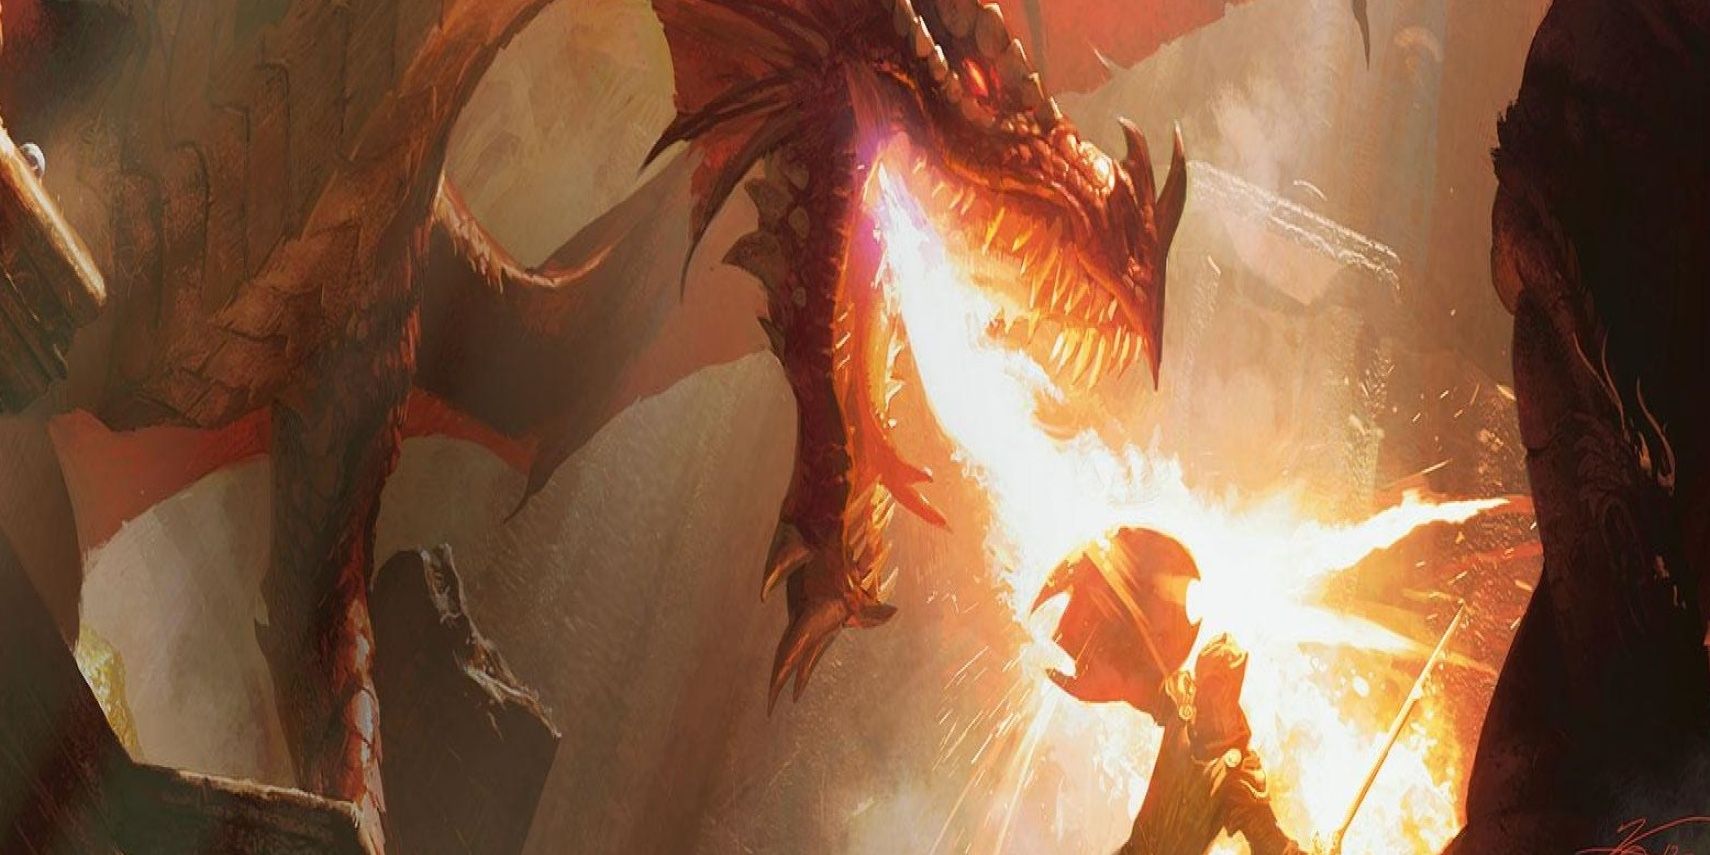 A dragon breathing fire in dungeons and dragons